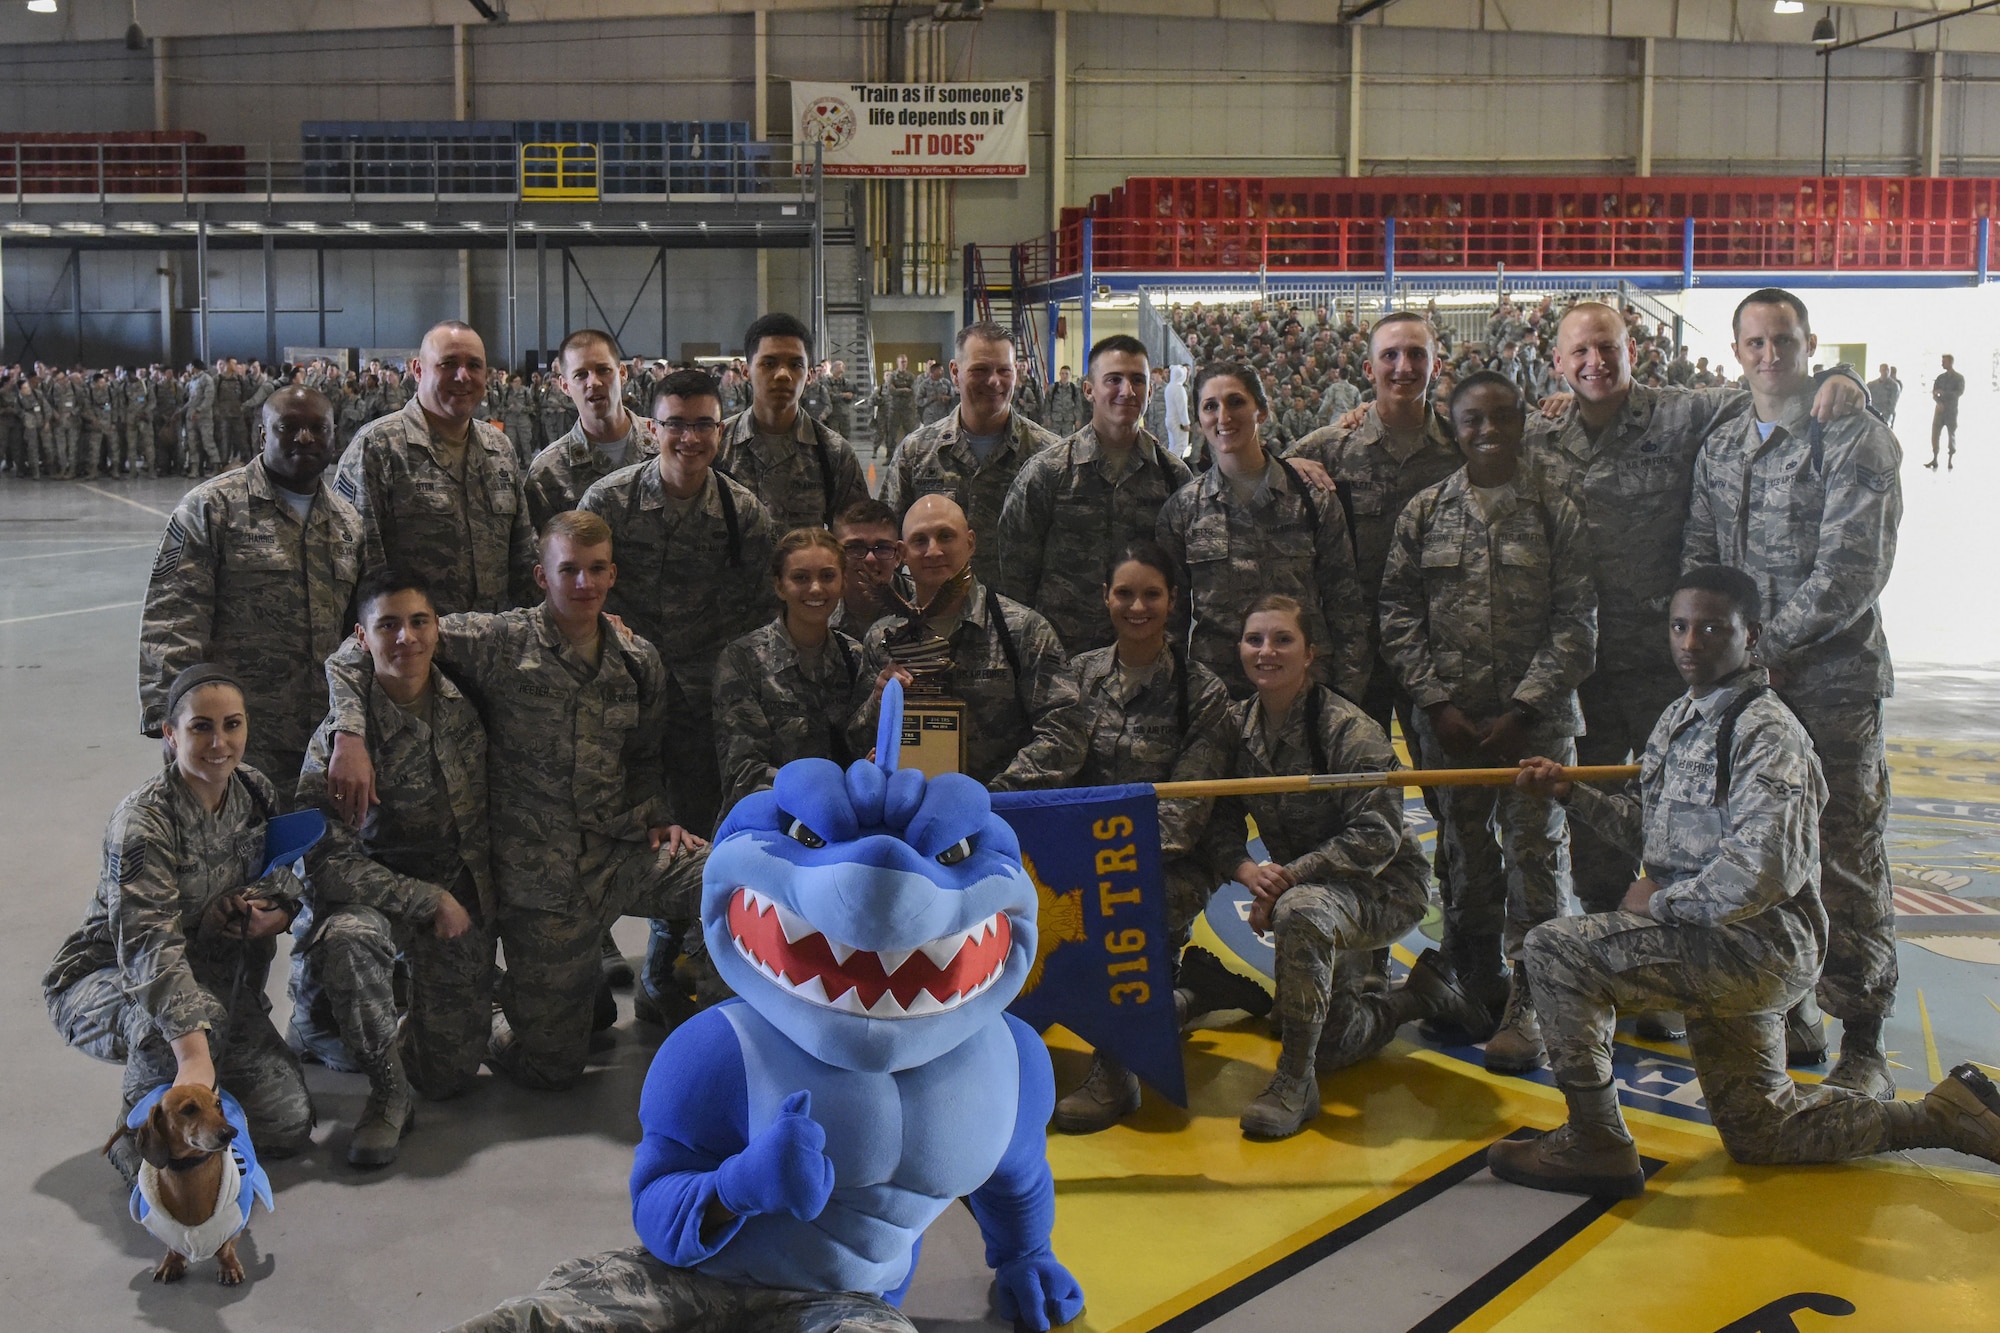 The 316th Training Squadron drill team poses with their trophy after winning each of the categories during the 17th Training Group drill competition at the Louis F. Garland Department of Defense Fire Academy on Goodfellow Air Force Base, Texas, Dec. 15, 2017. Leadership joined in the group photo along with the 316th TRS mascot and Gary the Dachshund. (U.S. Air Force Photo by Airman 1st Class Zachary Chapman/Released)